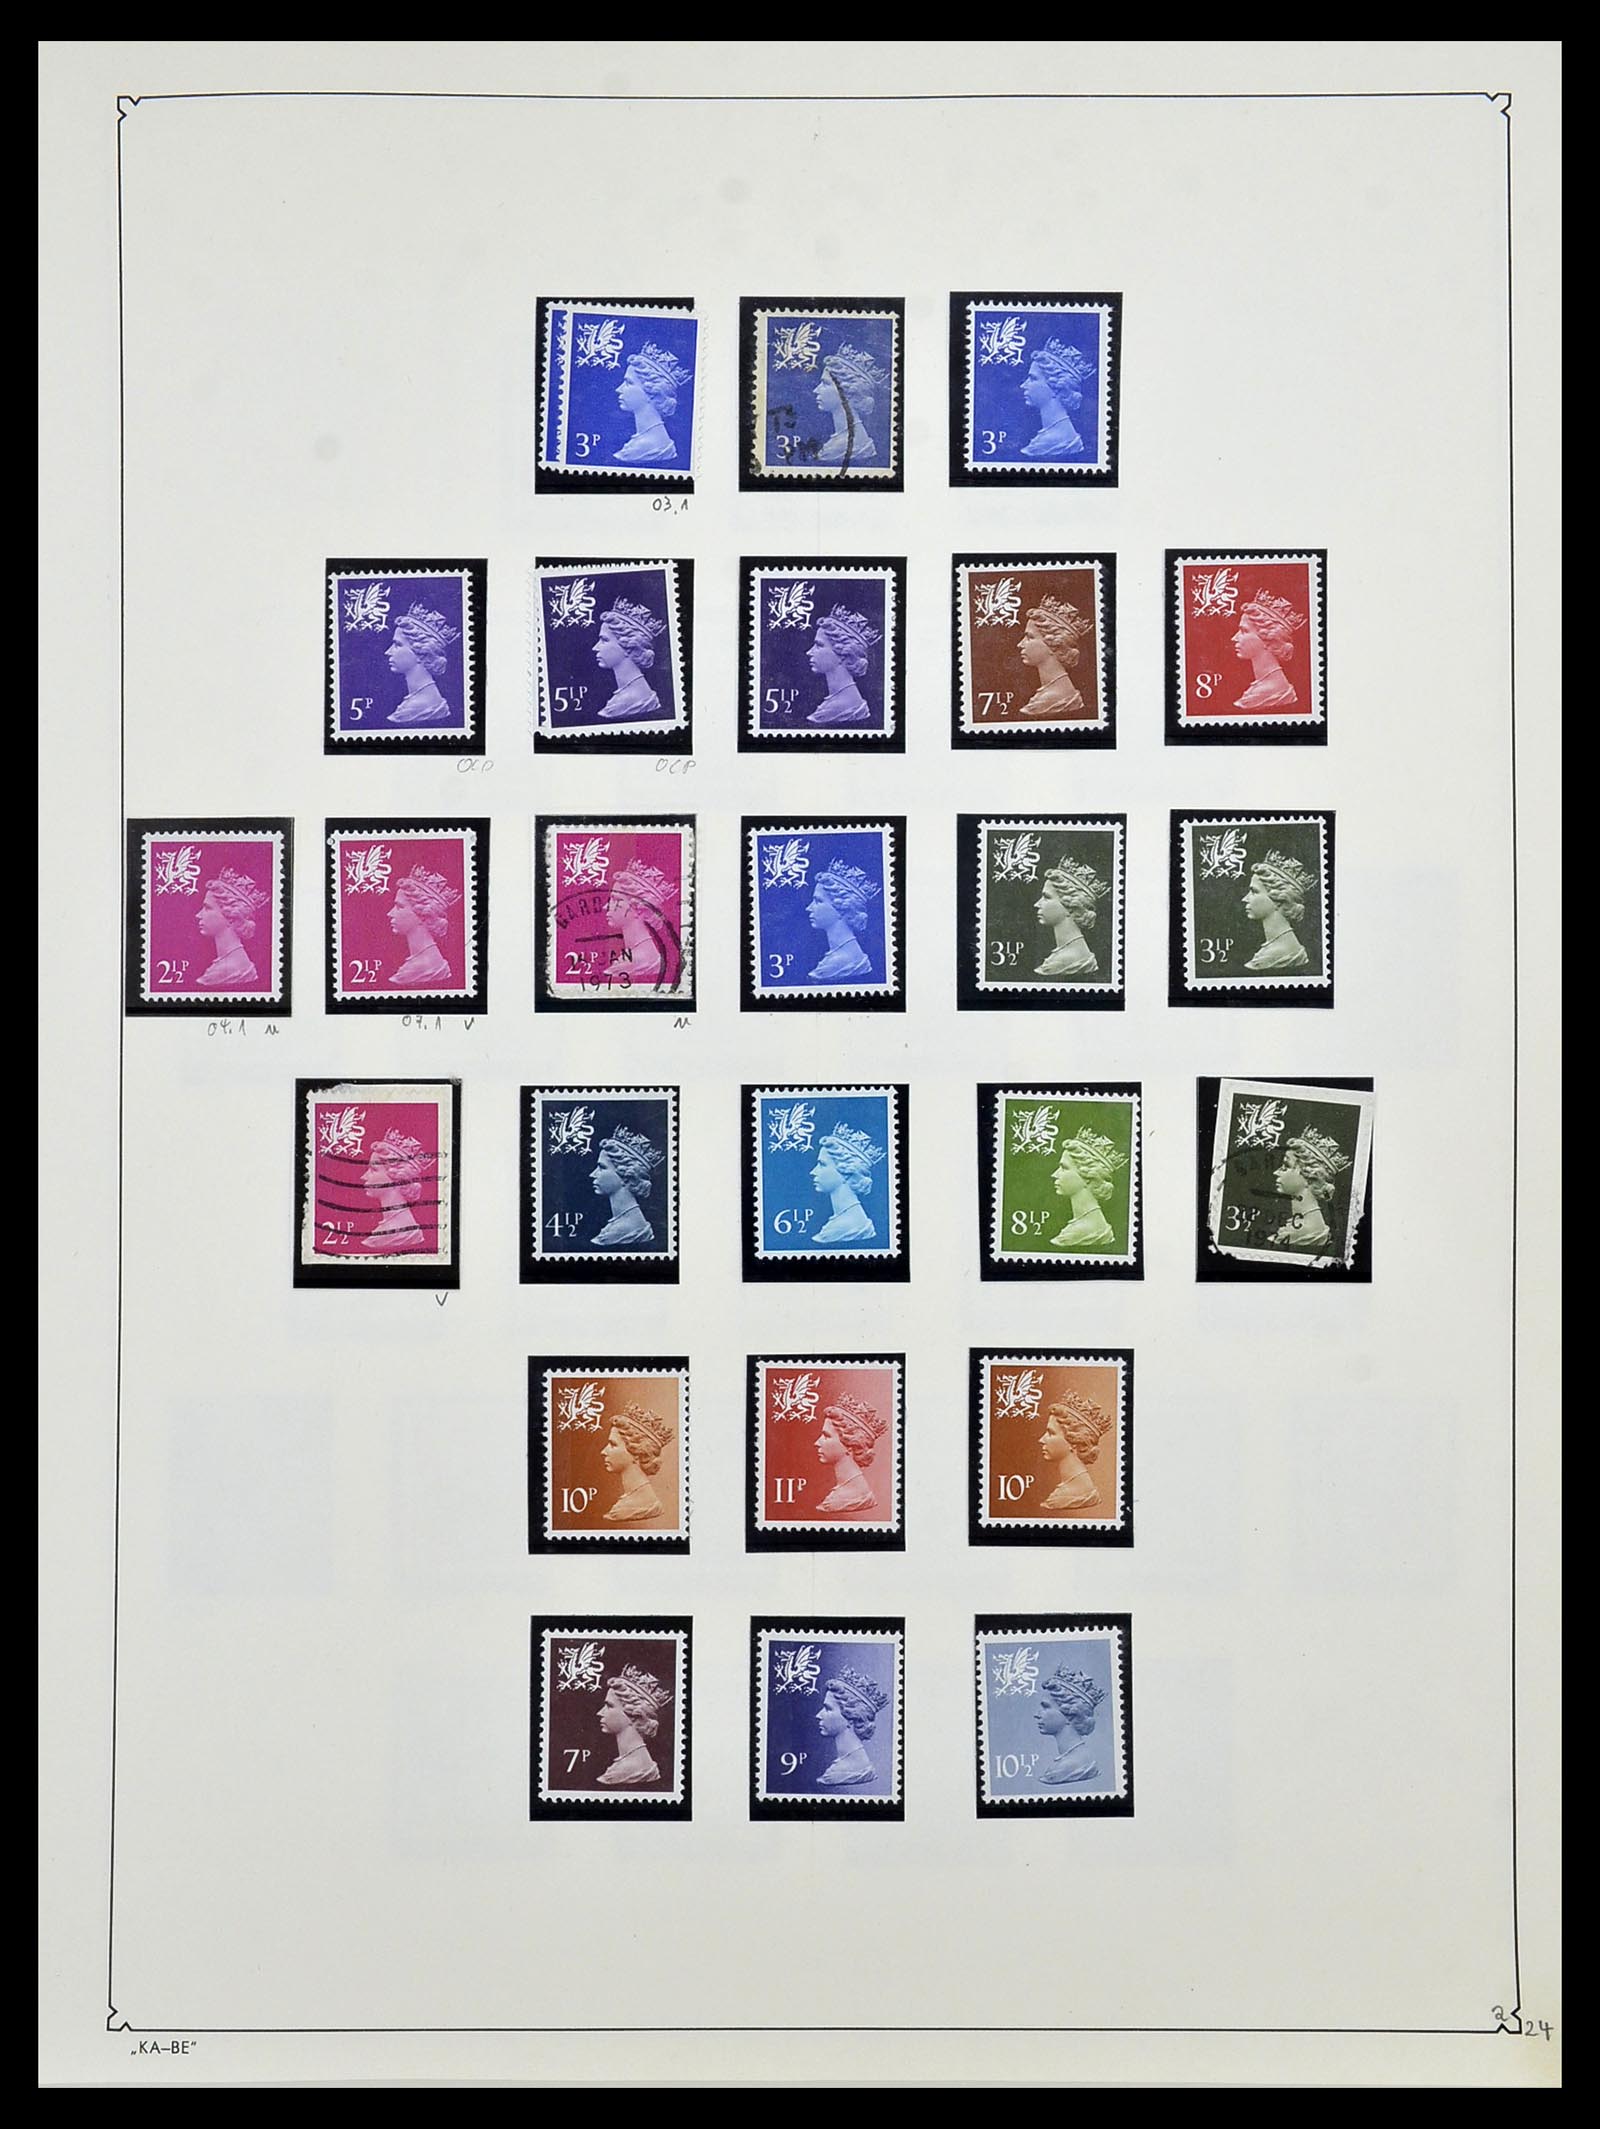 34221 032 - Stamp collection 34221 Great Britain Machins/castles 1971-2005.